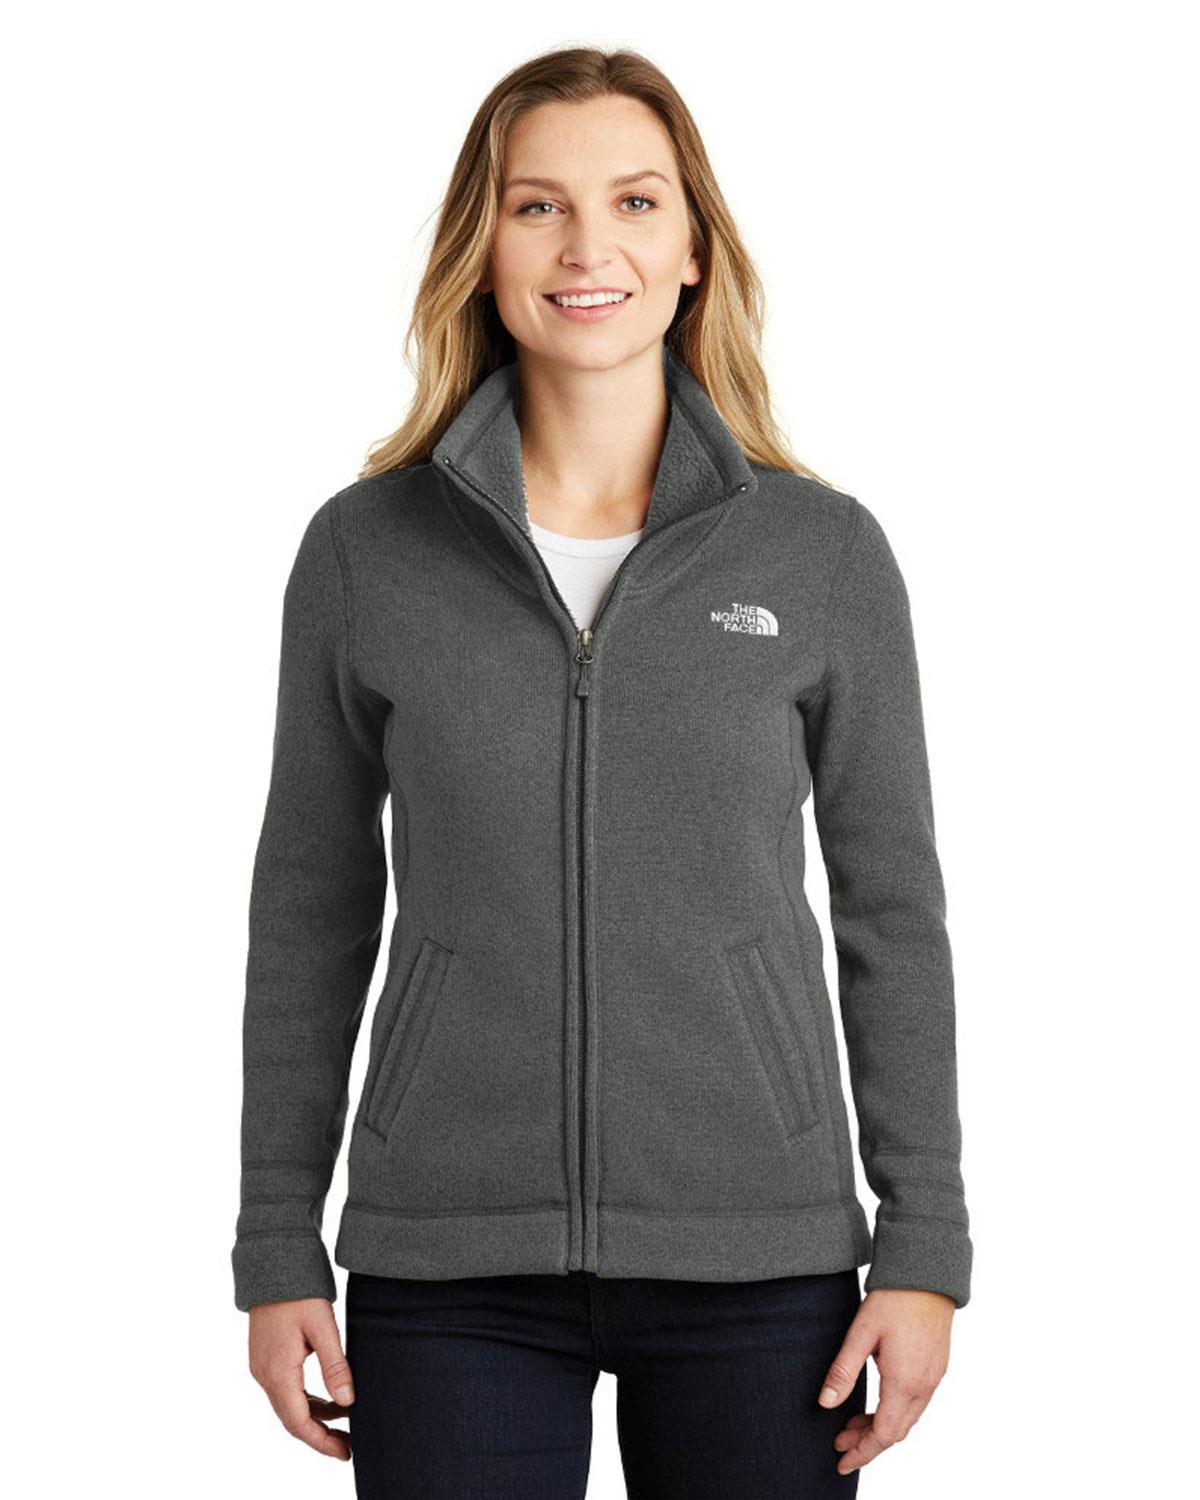 Size Chart for The North Face NF0A3LH8 Women Jacket - A2ZClothing.com